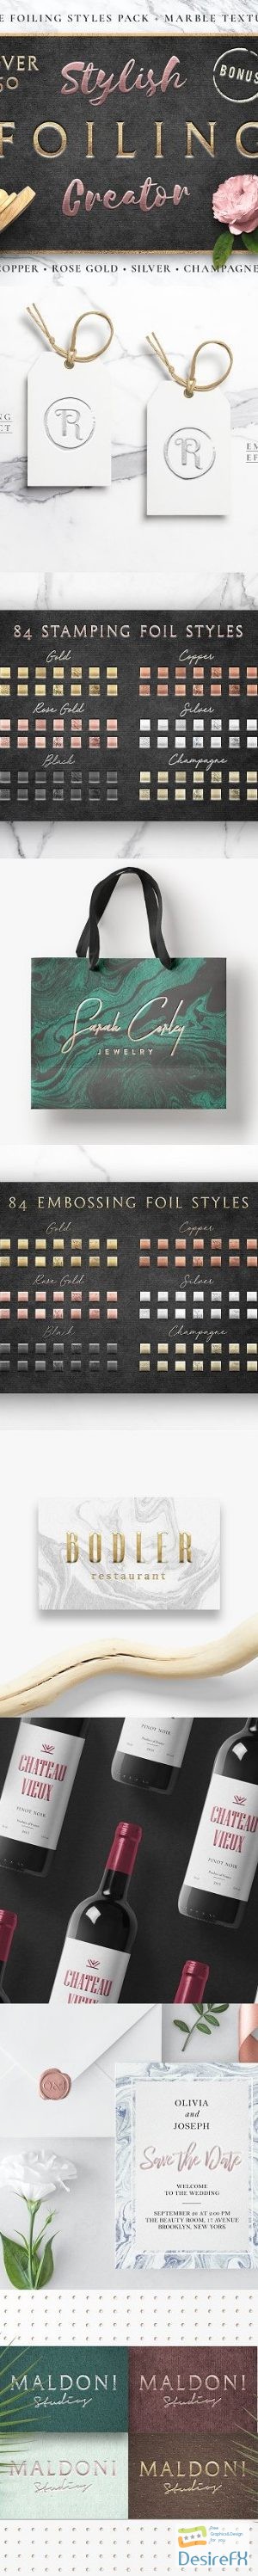 CM - Foiling Creator / Stamping Embossing 2048435